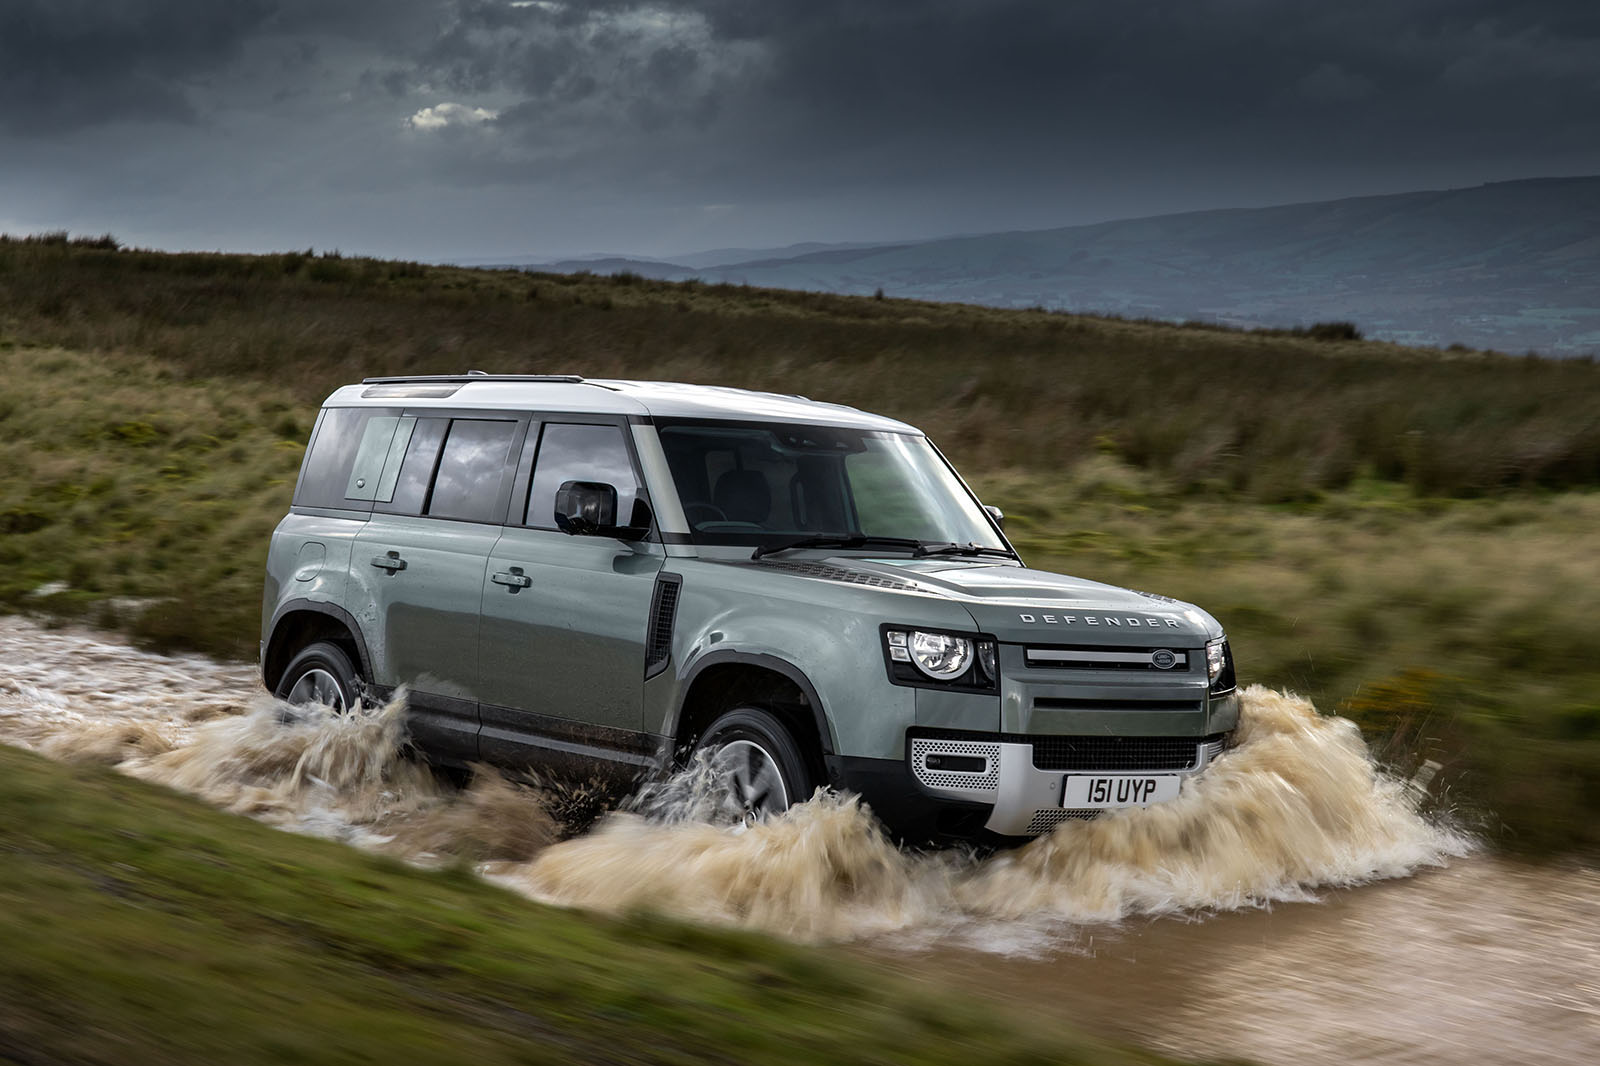 The latest Land Rover Defender loves to activate off-road mode